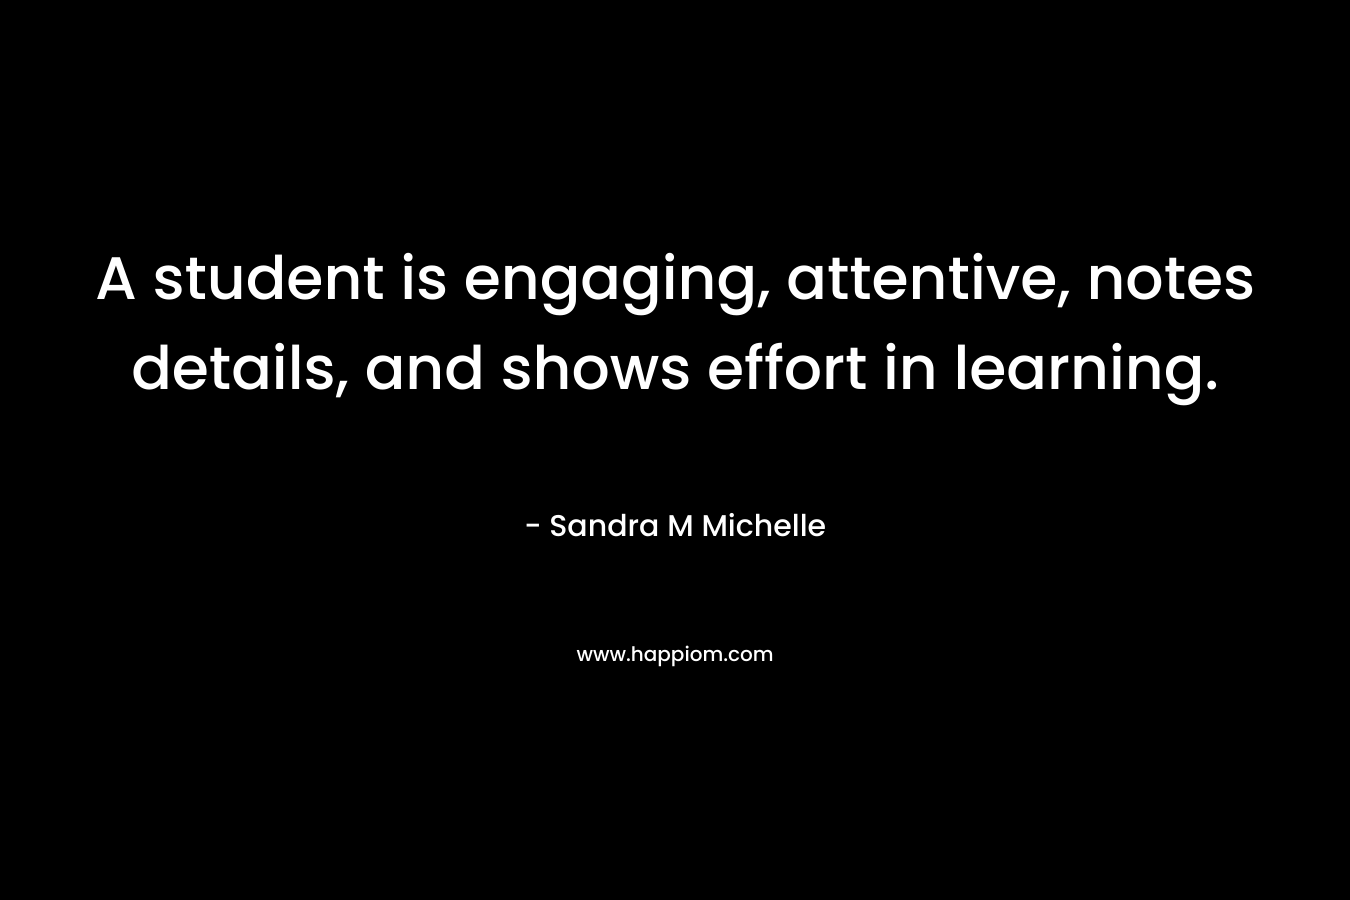 A student is engaging, attentive, notes details, and shows effort in learning. – Sandra M Michelle